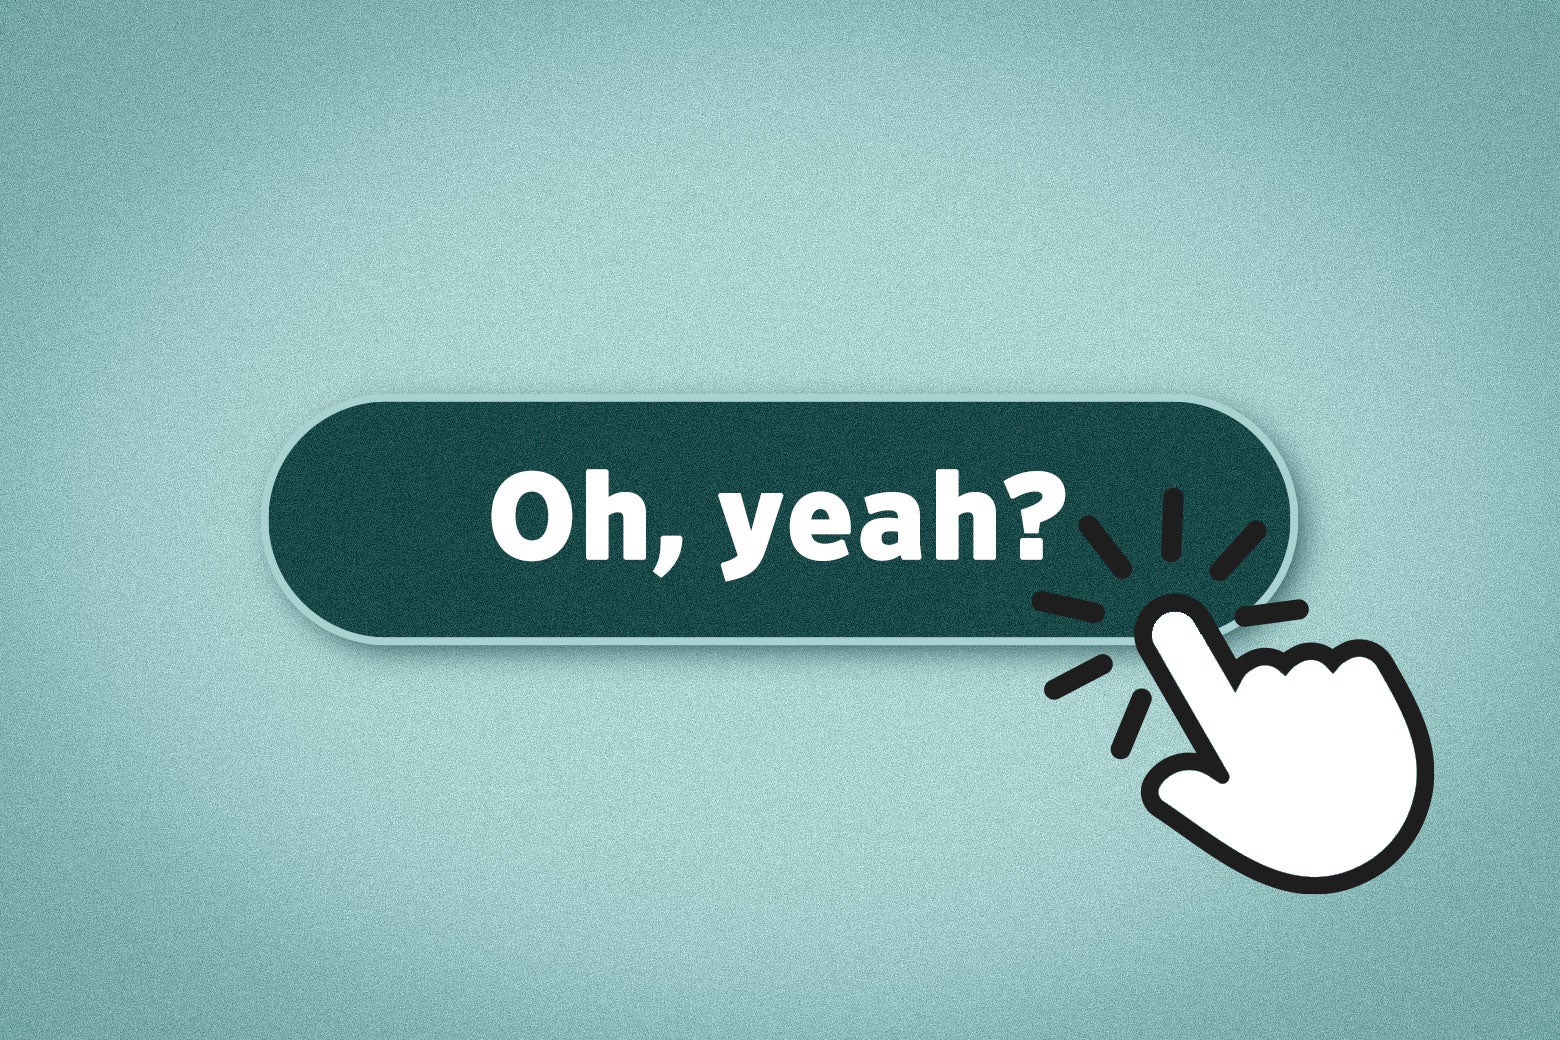 An illustrated hand clicks on a button that says, "Oh, yeah?"